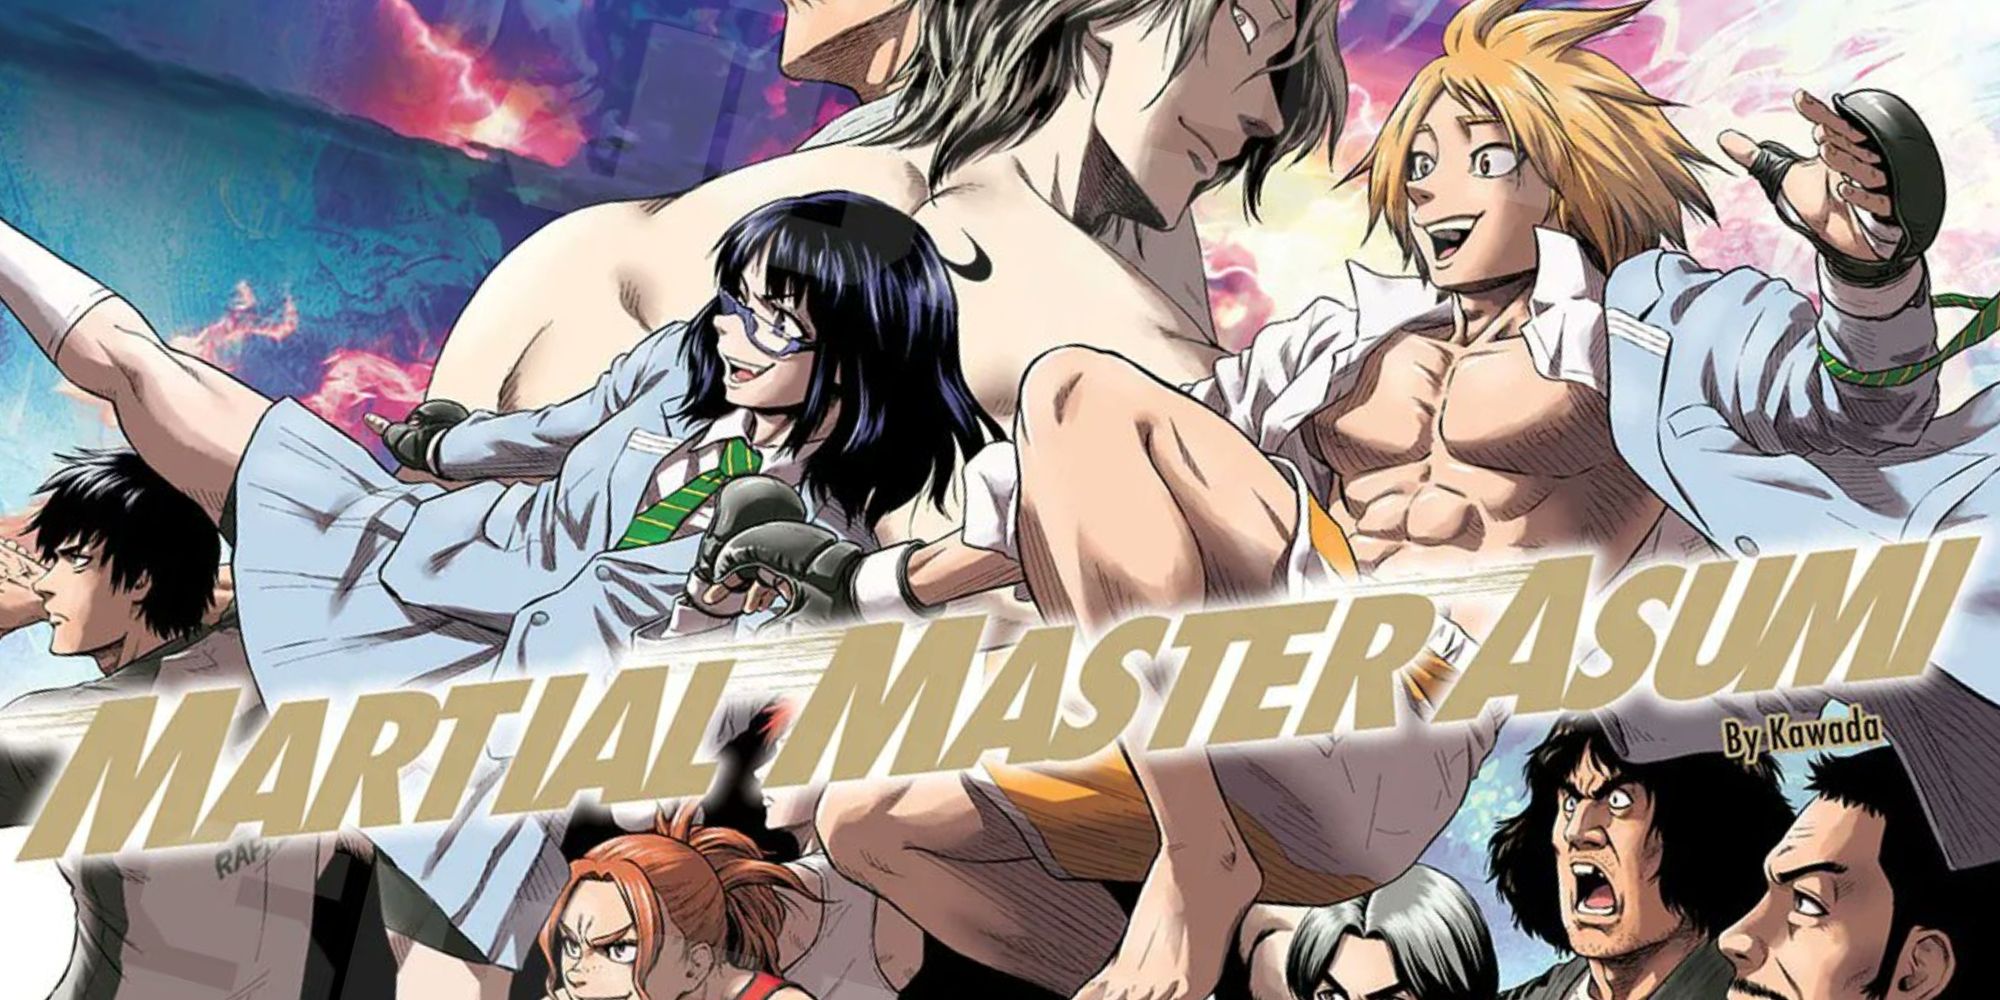 Martial Master Asumi cover art with asumi and major recurring characters